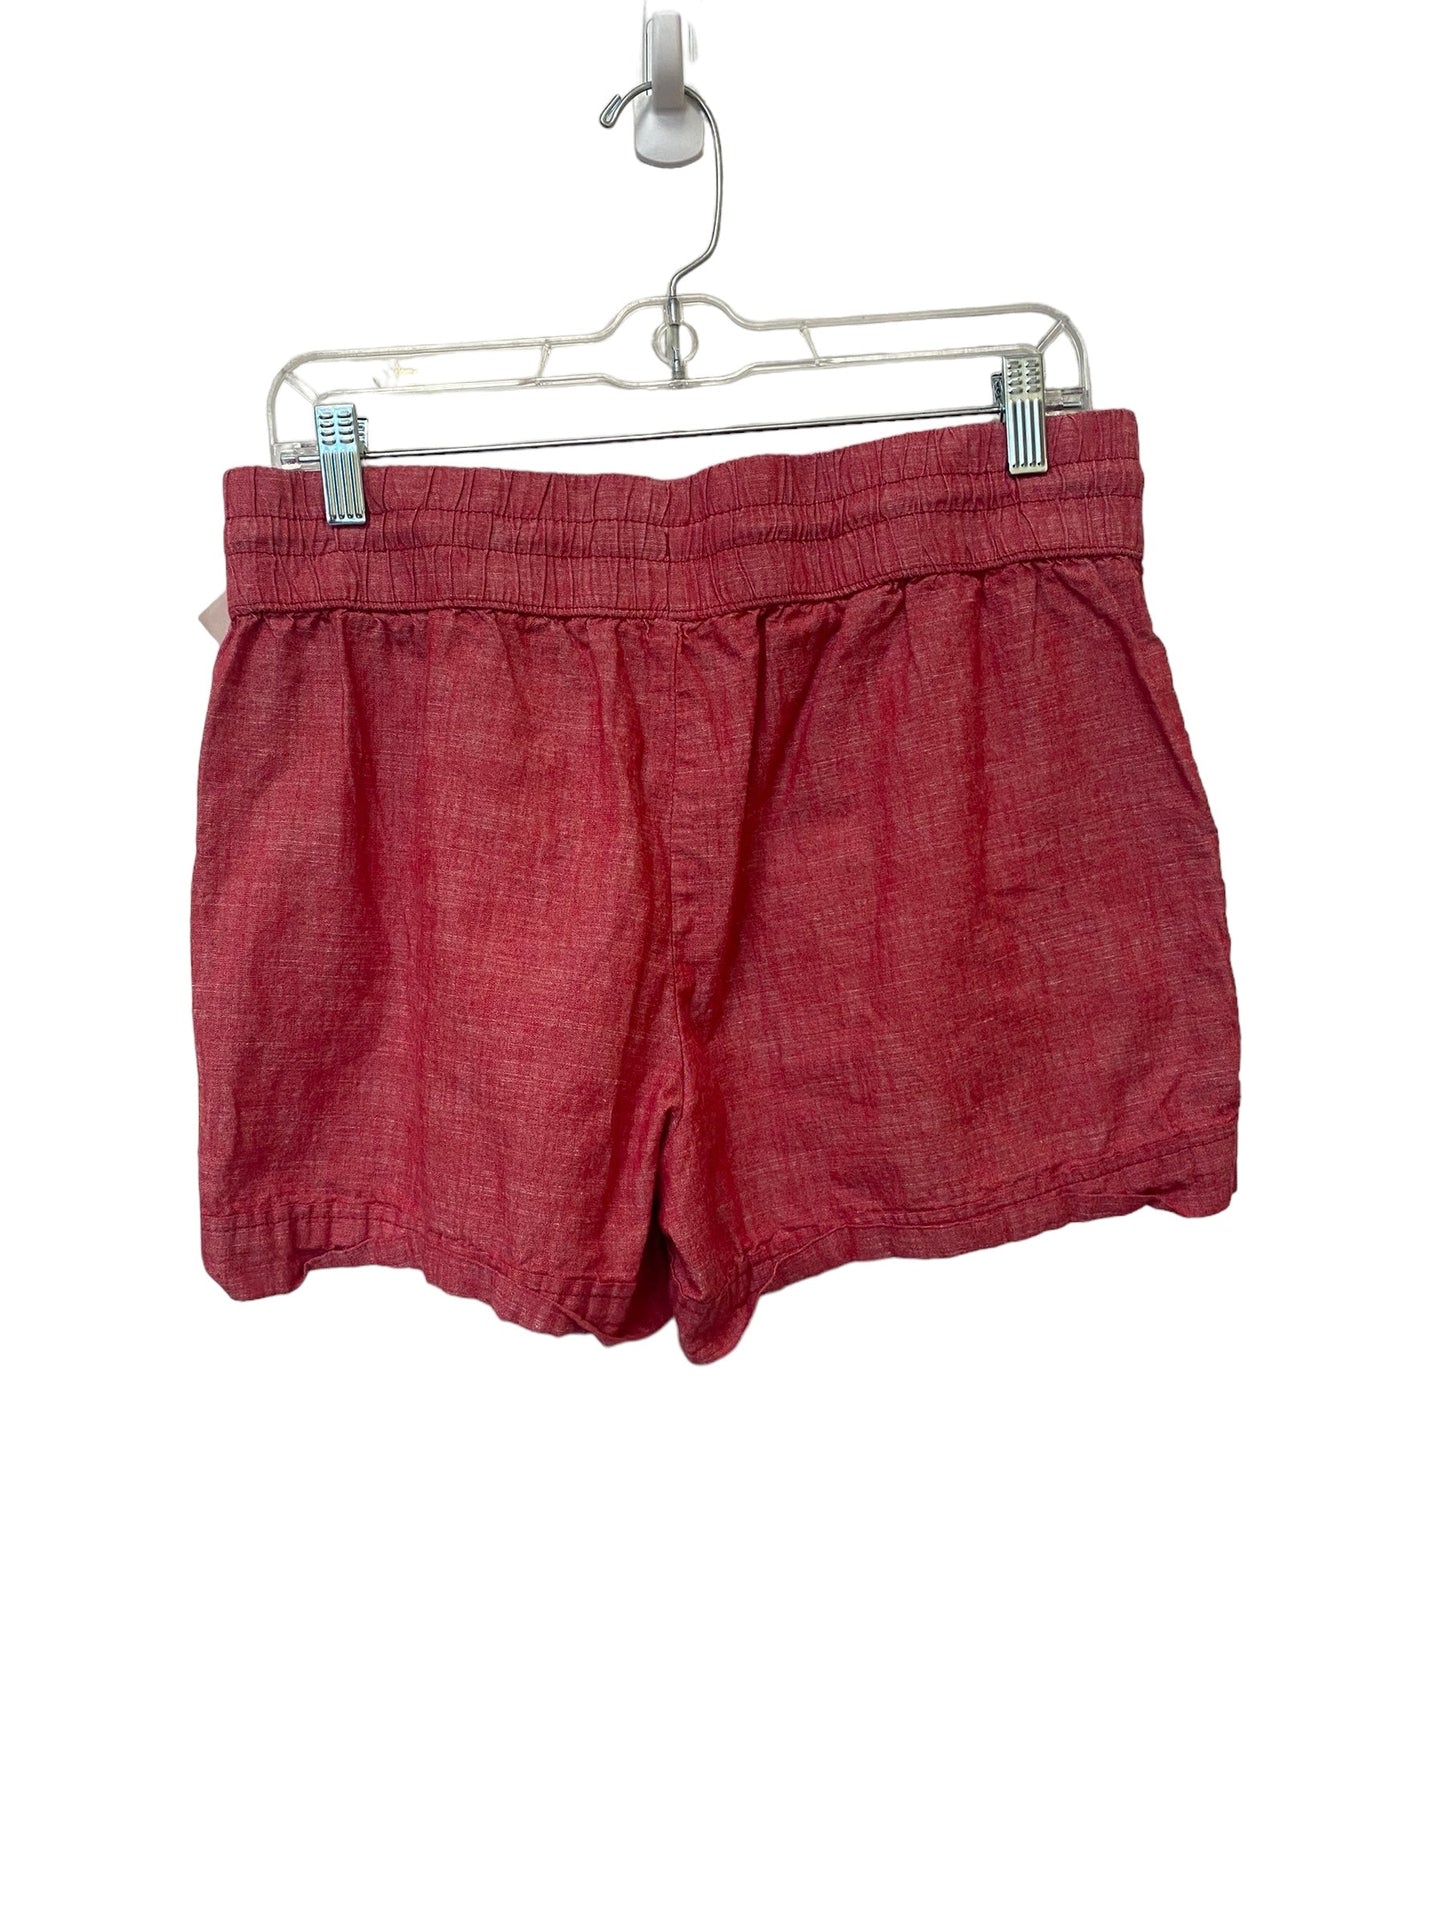 Red Shorts Bcg, Size M